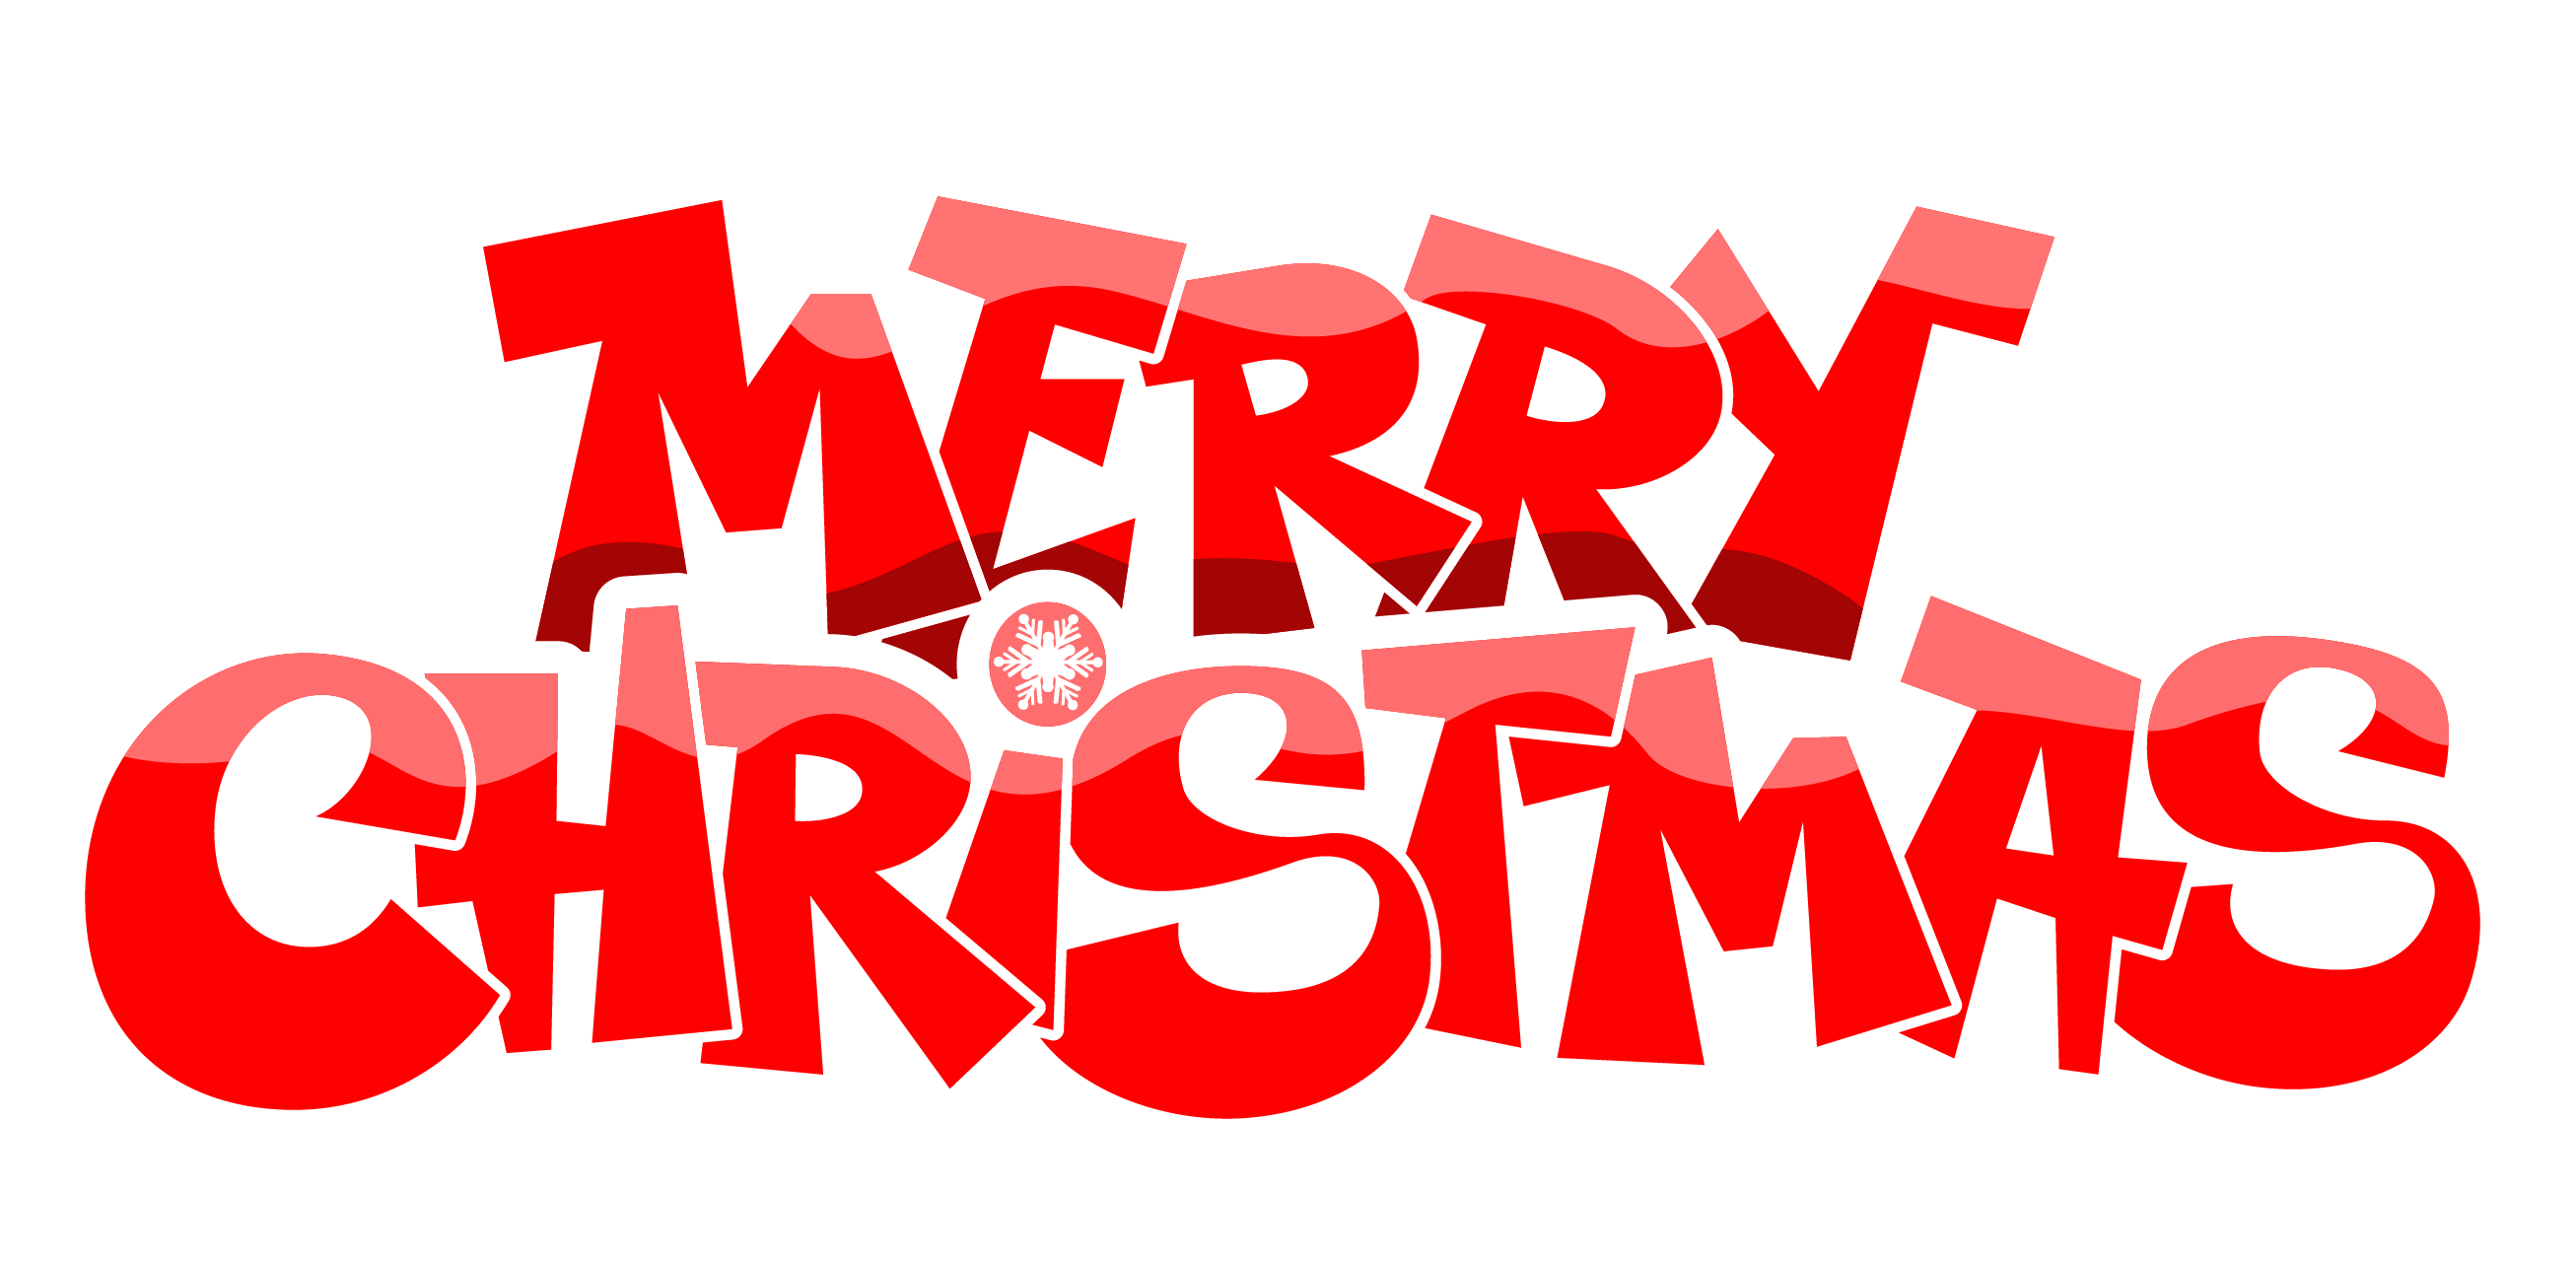 Xmas Stuff For > Merry Christmas Clip Art Png